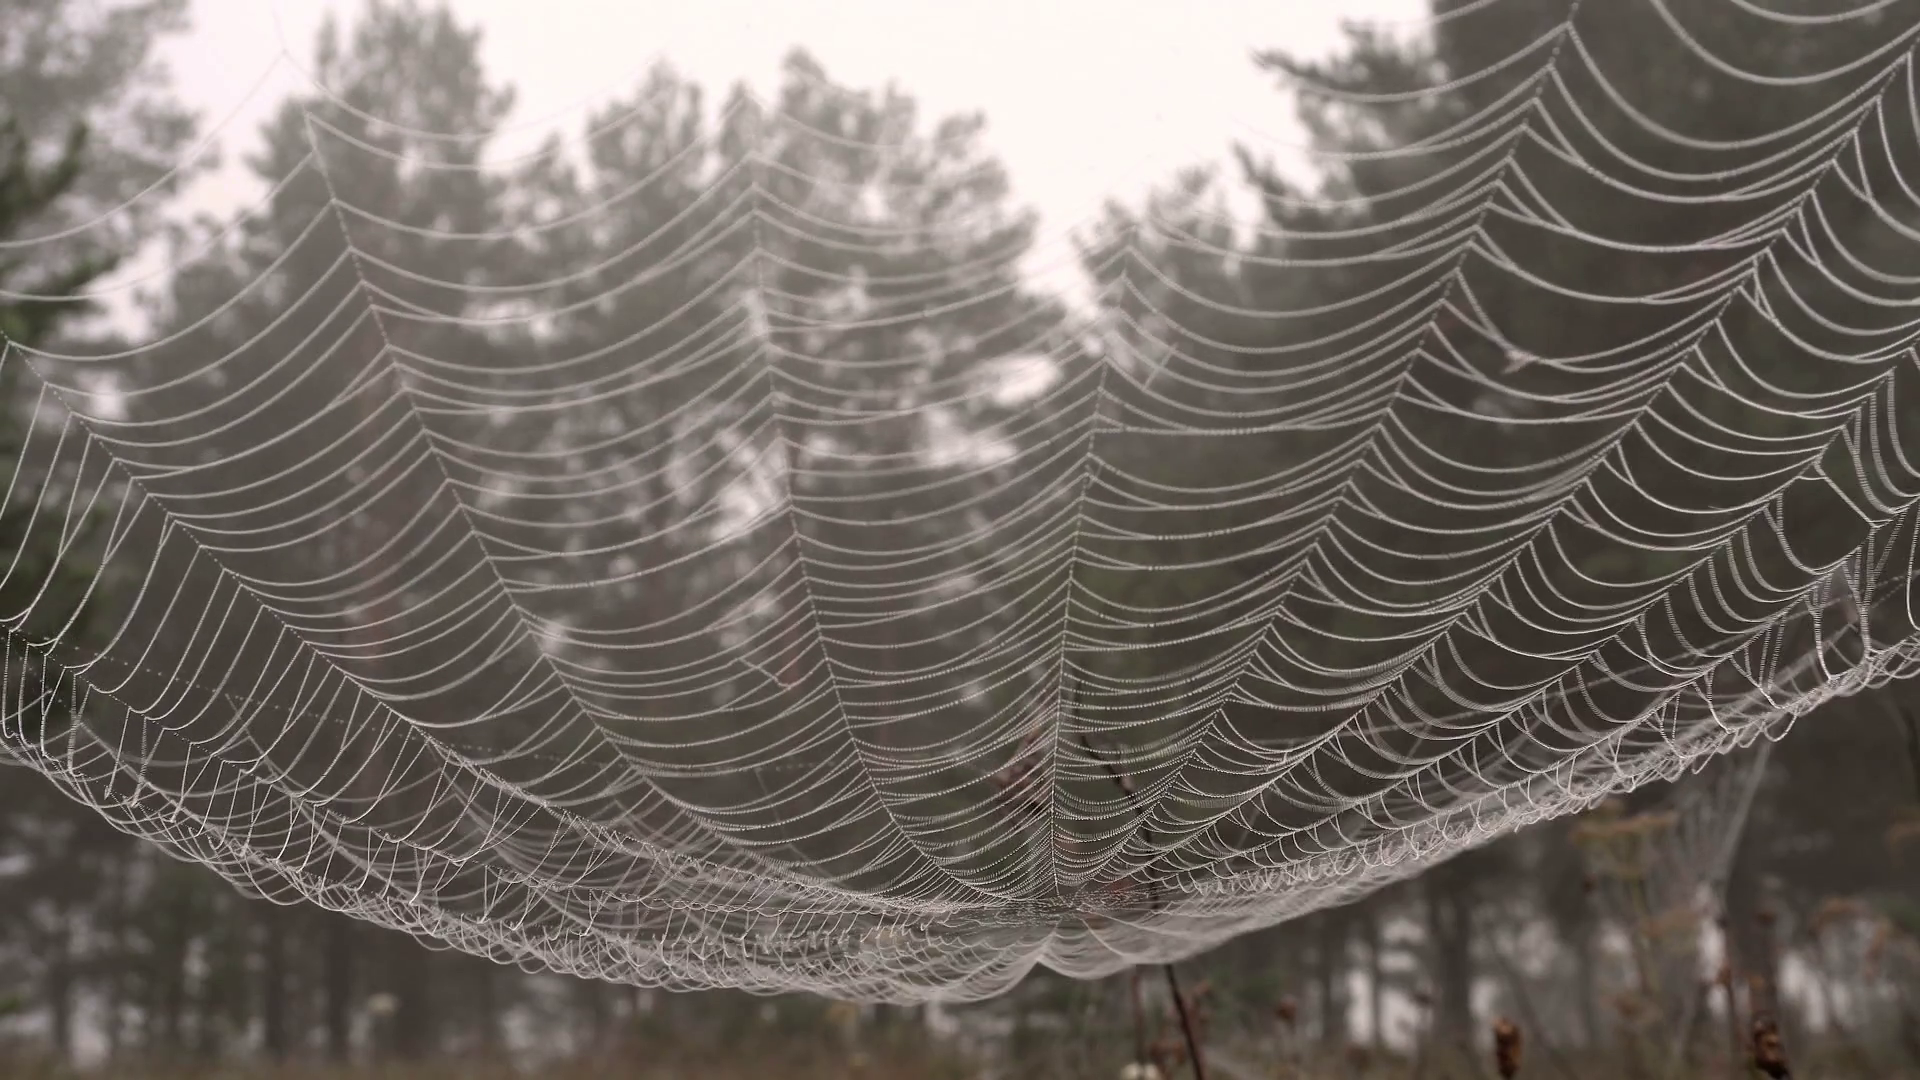 Large Cobweb in Droplets of Dew Against Background of a Misty Forest ...